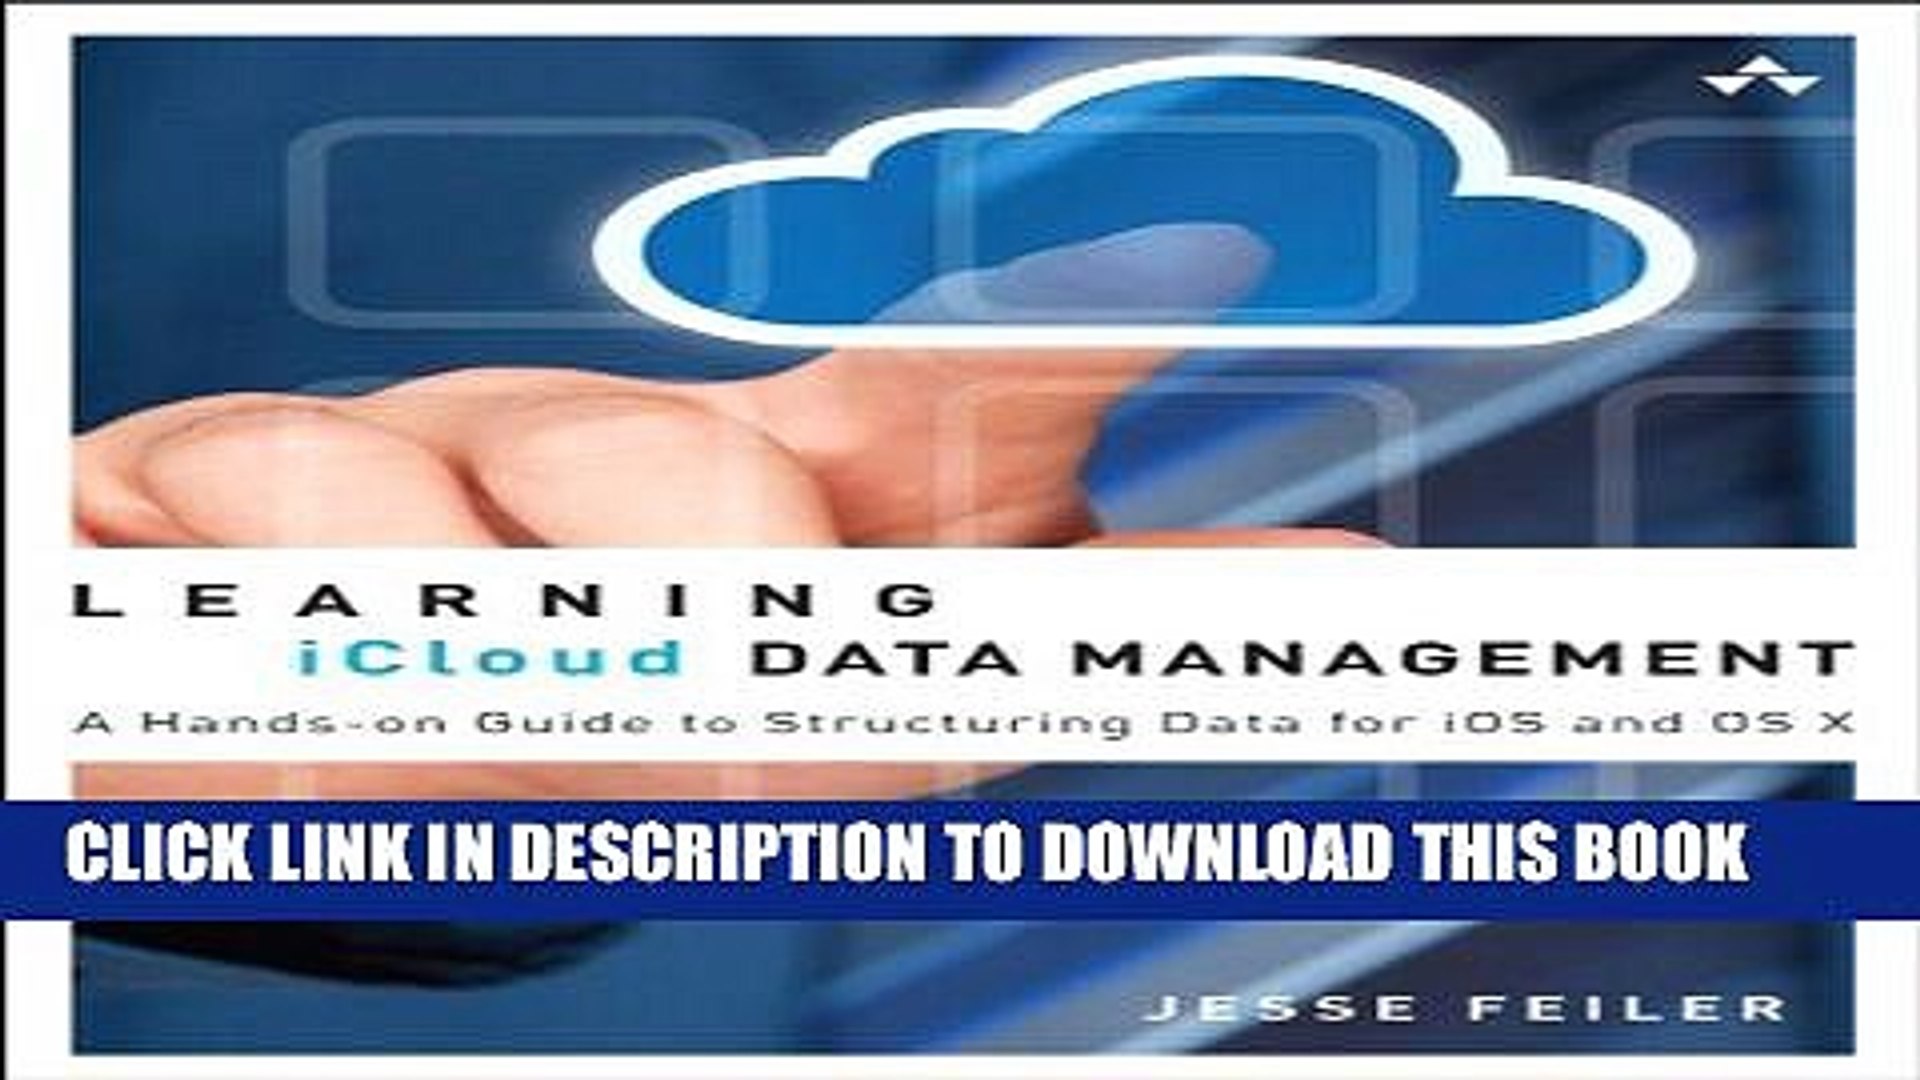 New Book Learning iCloud Data Management: A Hands-On Guide to Structuring Data for iOS and OS X